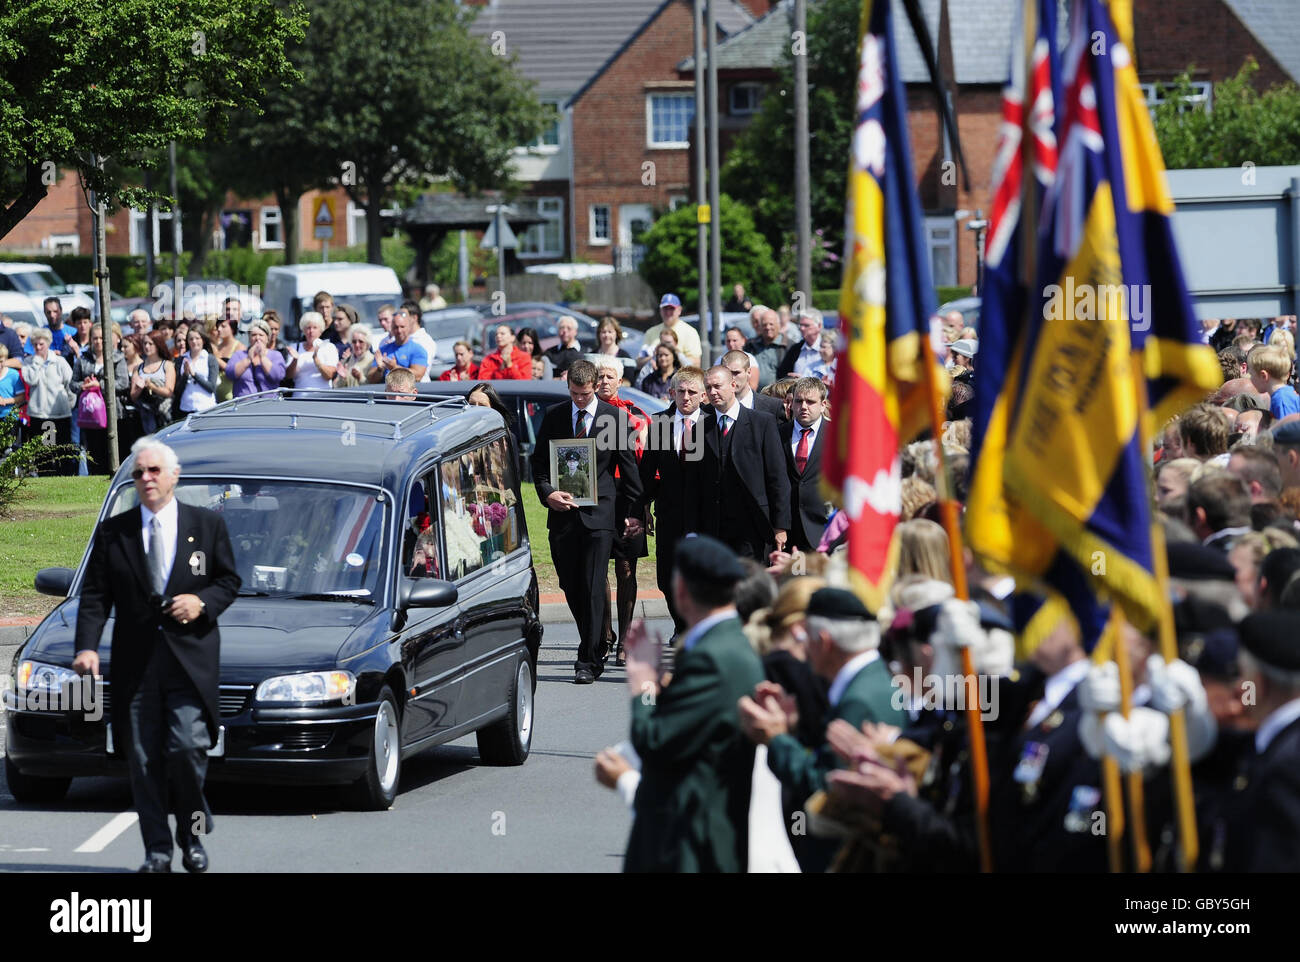 Mourners attend the funeral procession for Rifleman James Backhouse in Castleford, West Yorkshire. Backhouse died in an explosion near Sangin in Helmand province on July 10. Stock Photo